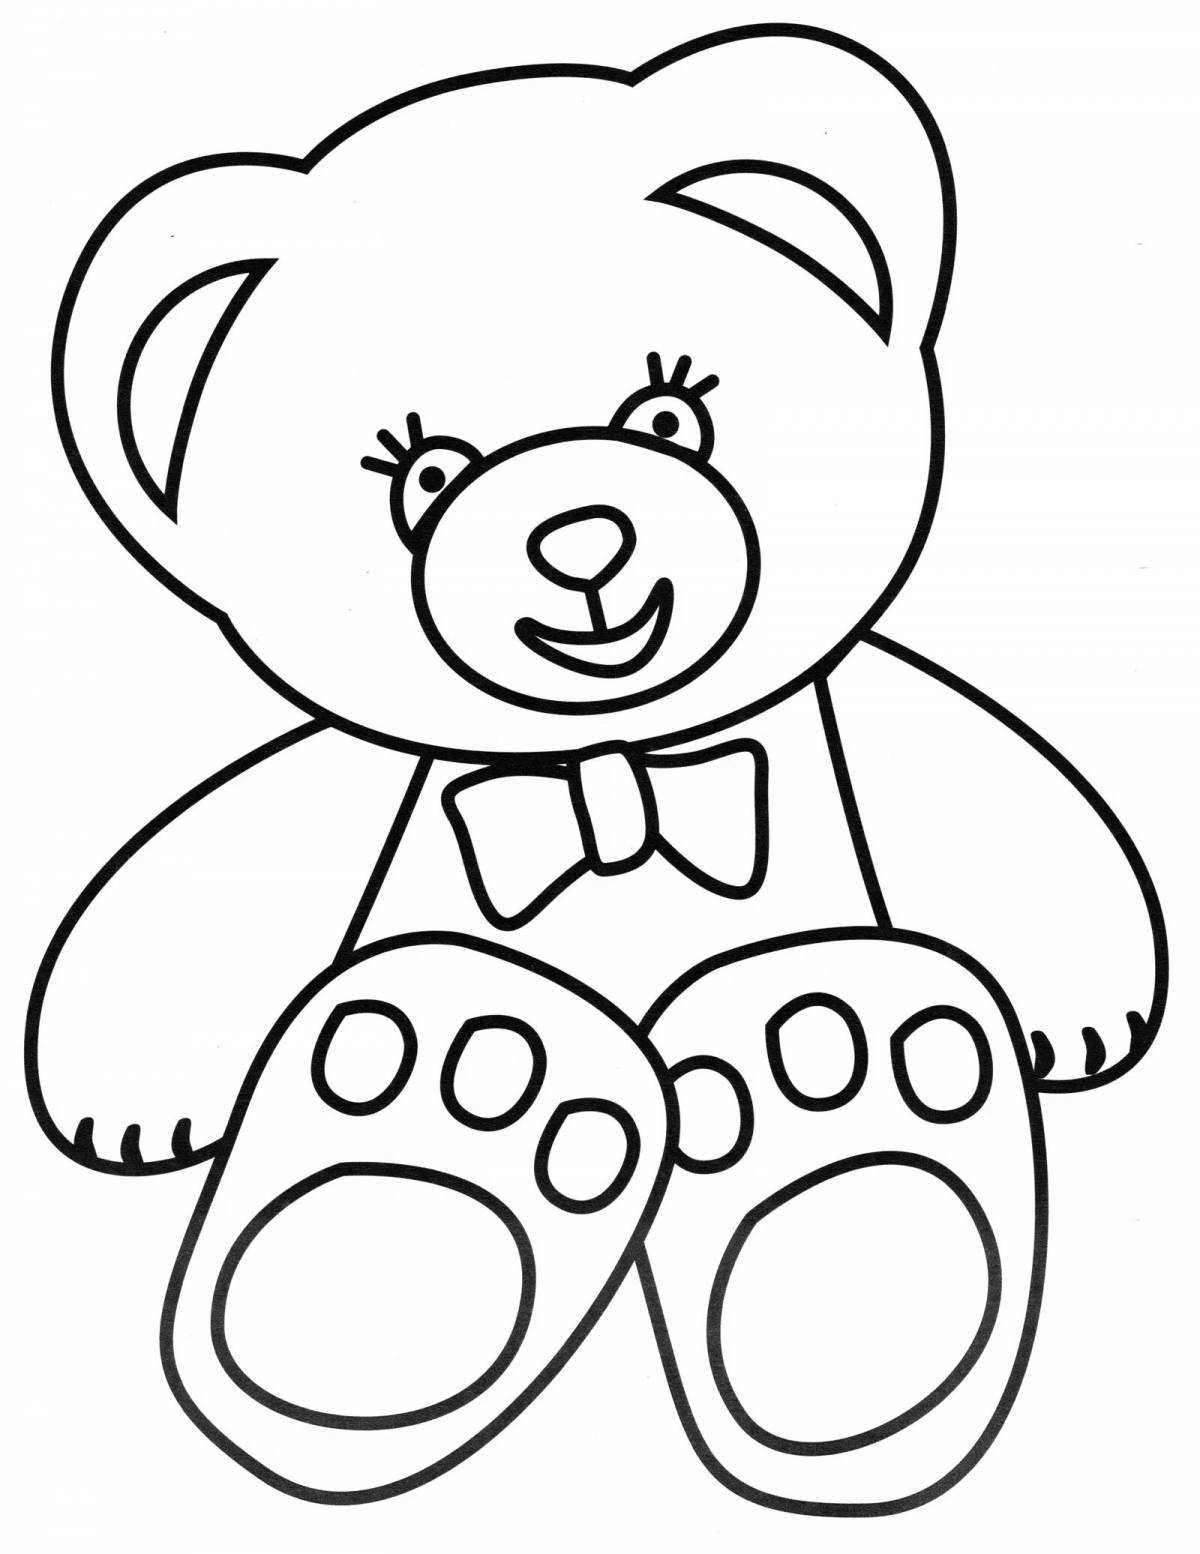 Outstanding jelly bear valera coloring